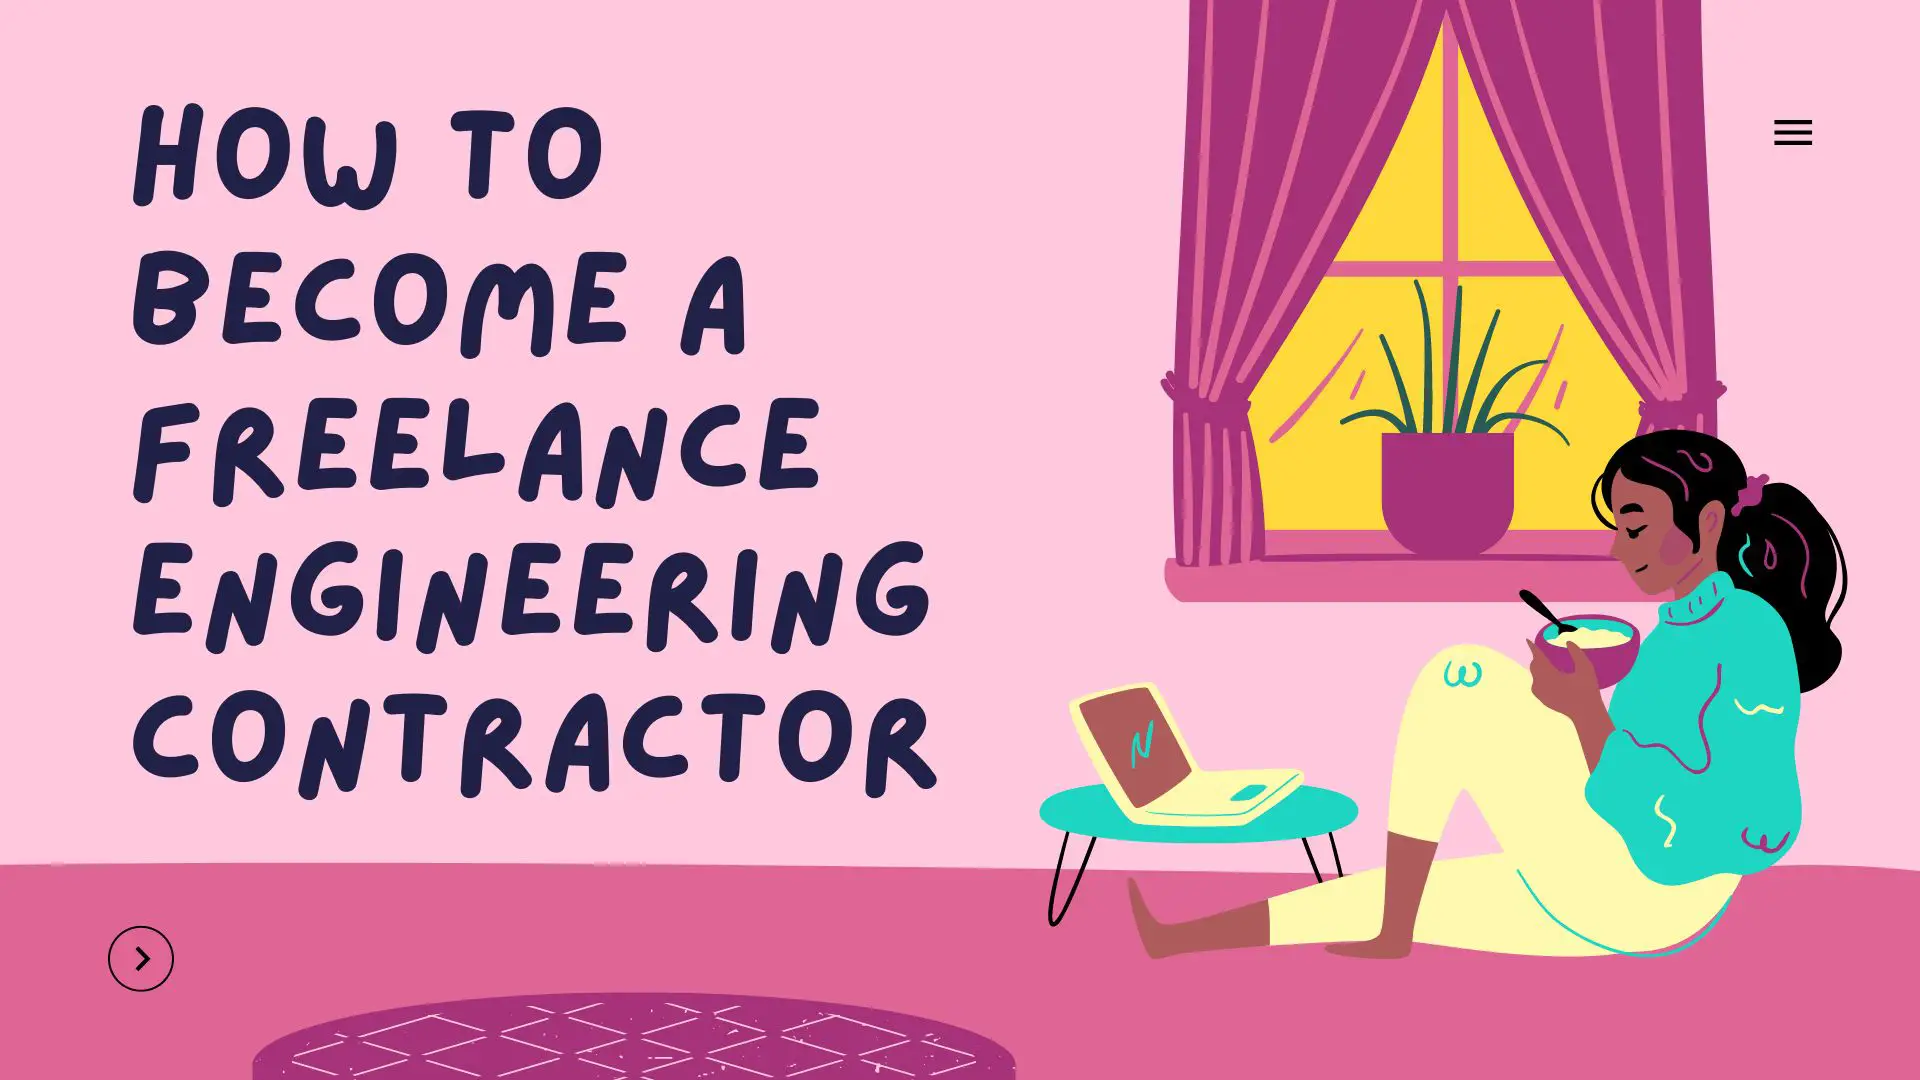 How To Become A Freelance Engineering Contractor